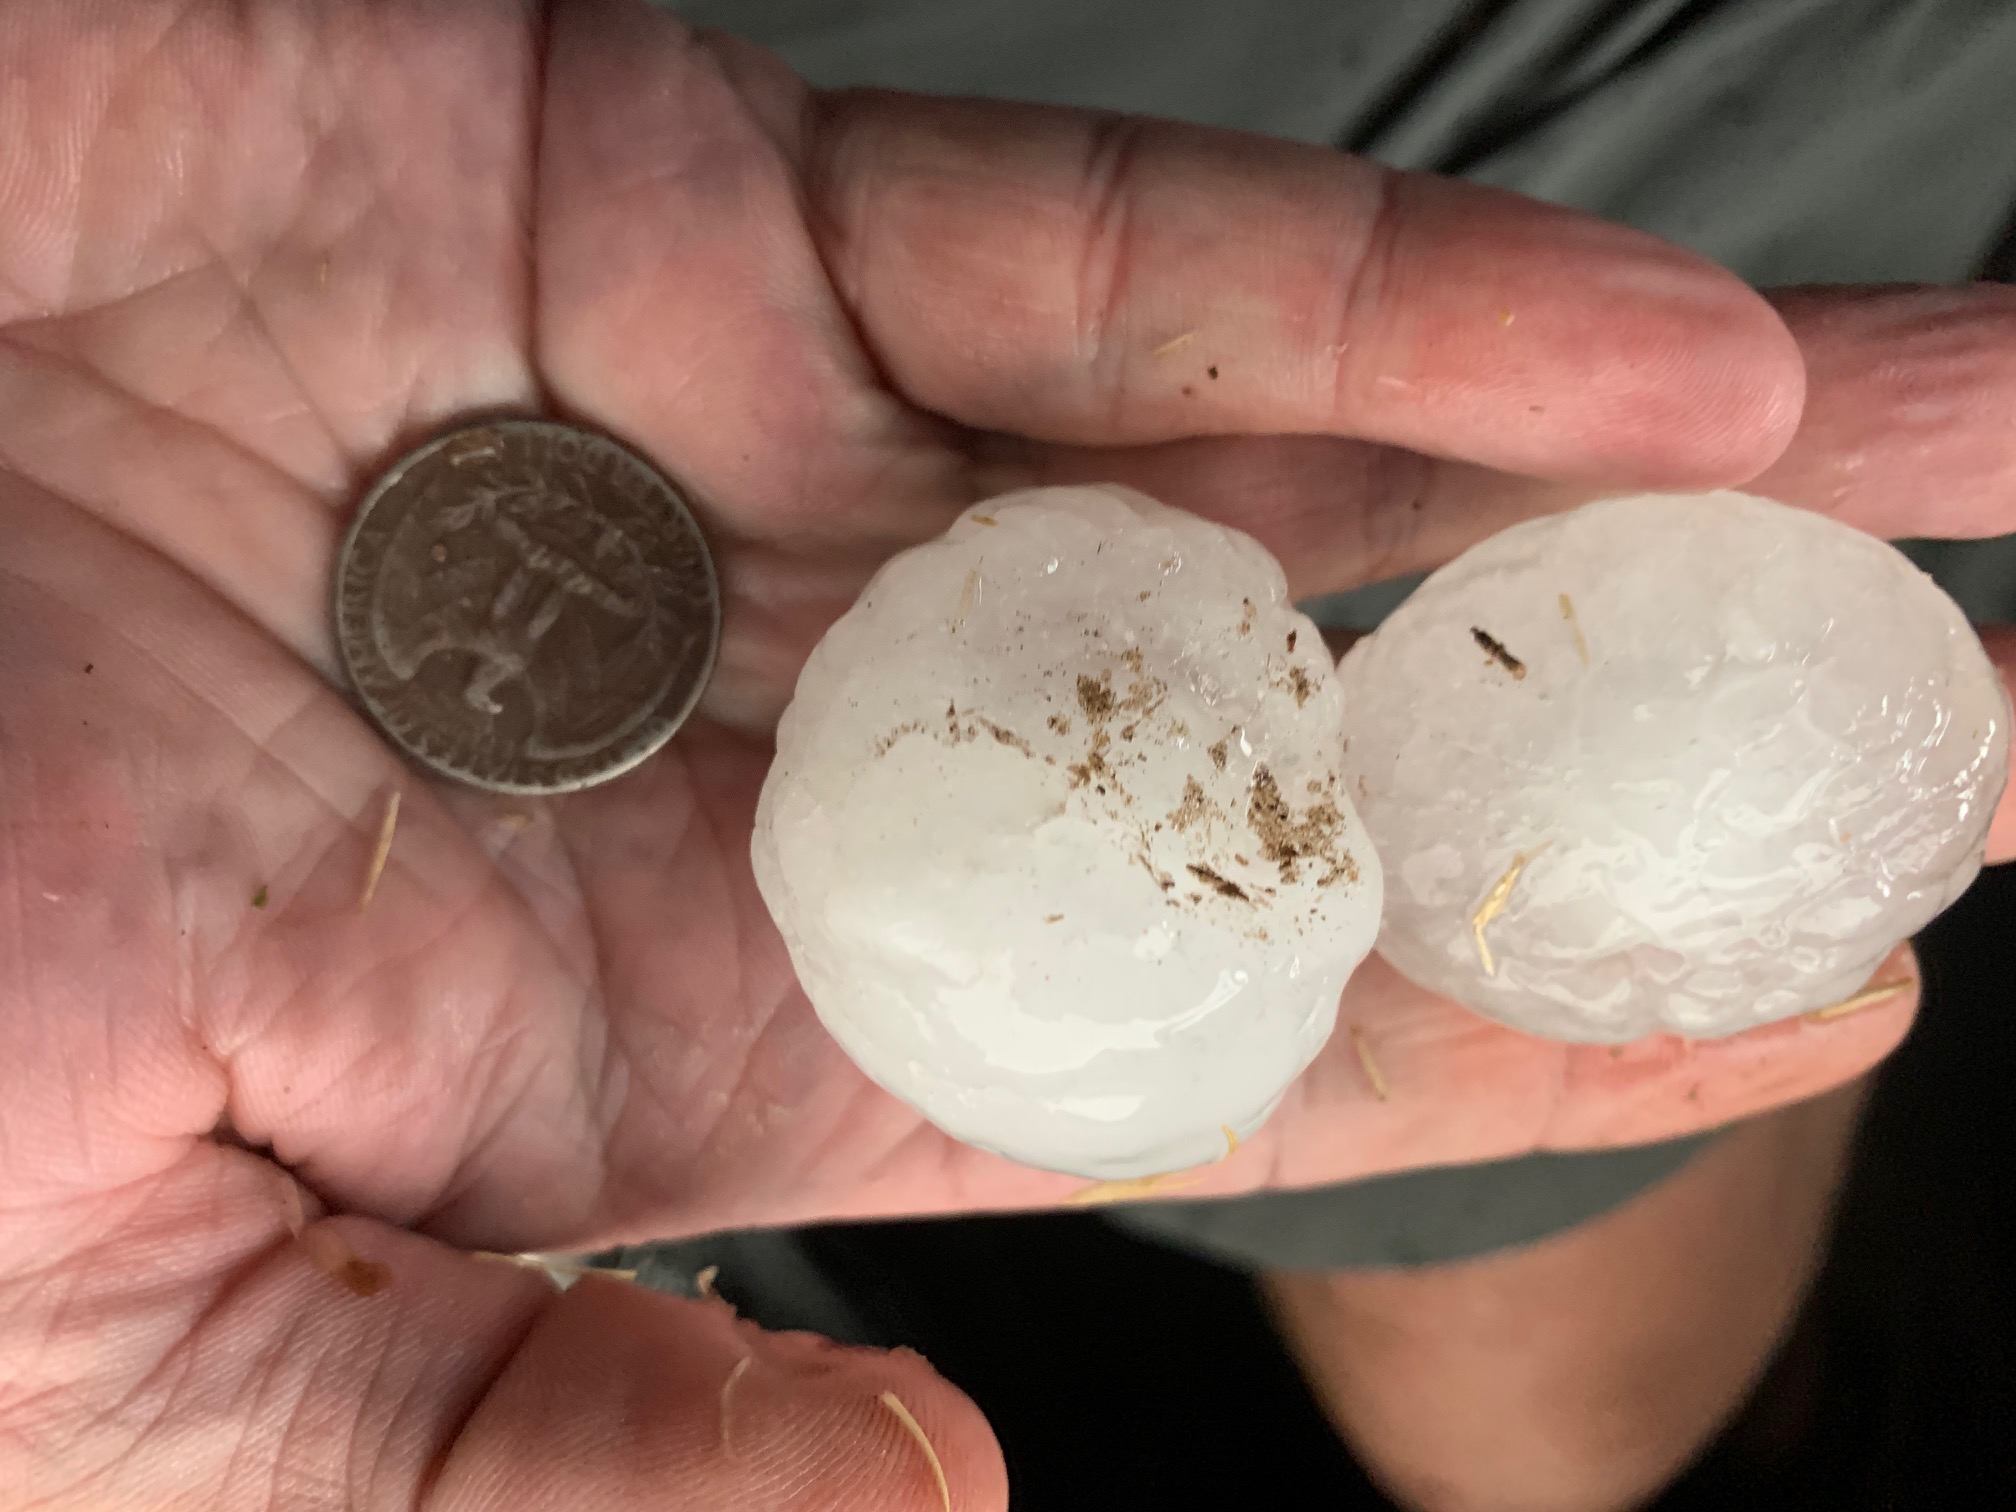 Large hail that fell in Muleshoe Sunday evening (1 May 2022). Picture is courtesy of Gil Rennels.